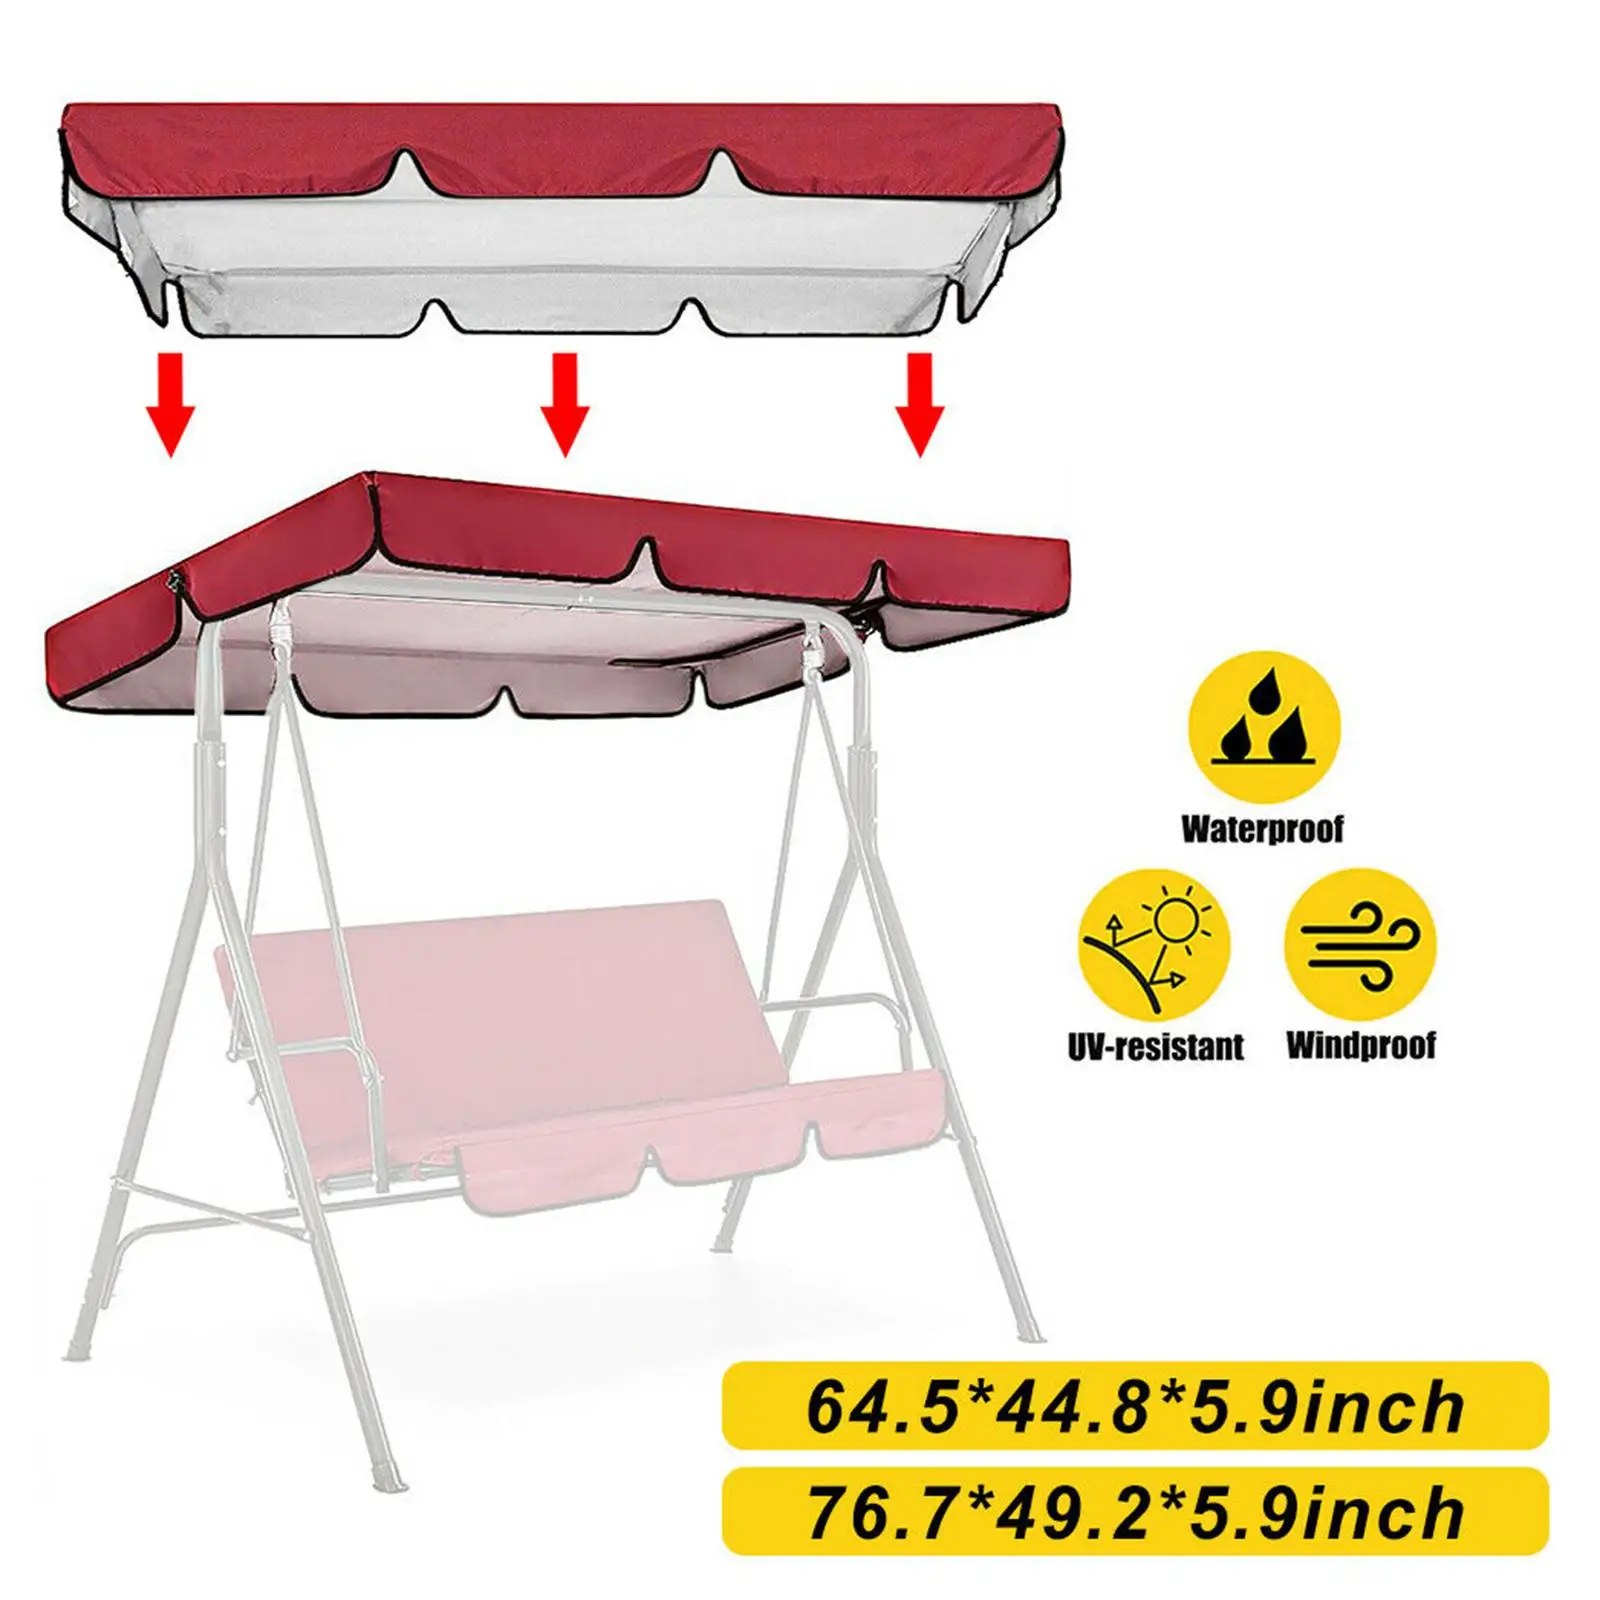 Patio , Durable, Lightweight, Waterproof 3 Seater Swing Awning  Rocking Chairs